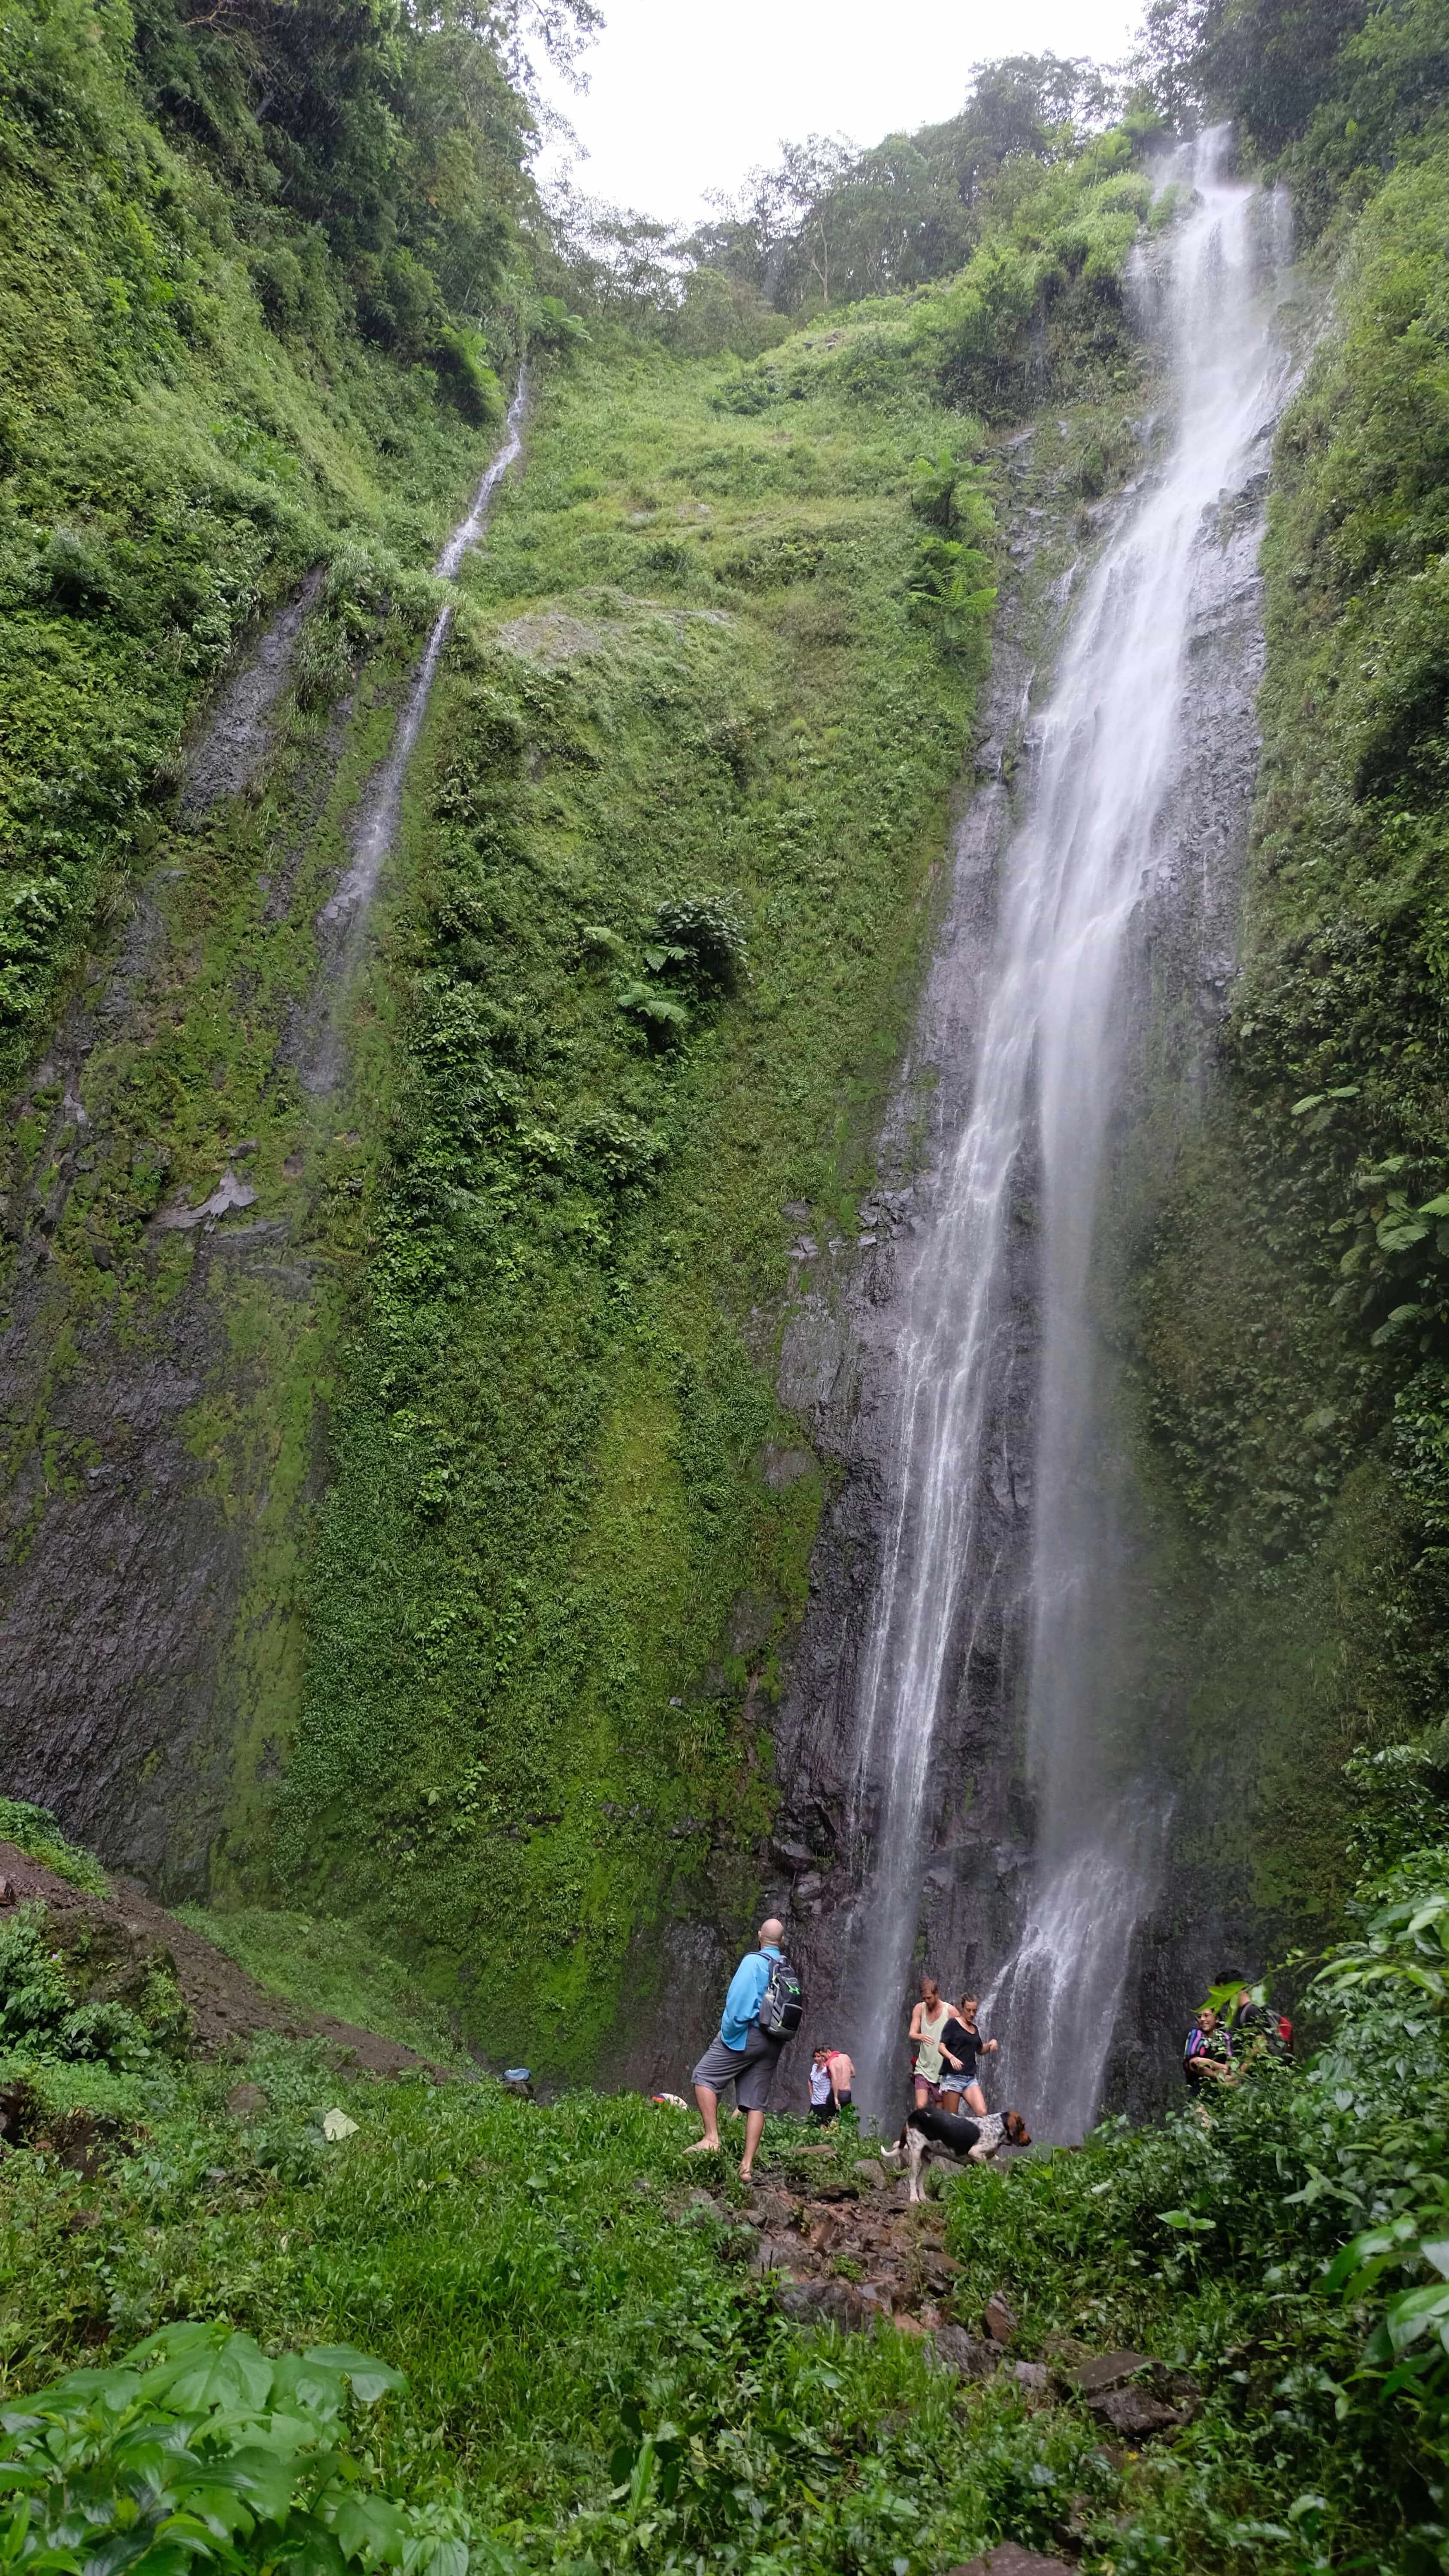 Hike the Ramon Waterfall is on the top things to do in Ometepe Island.